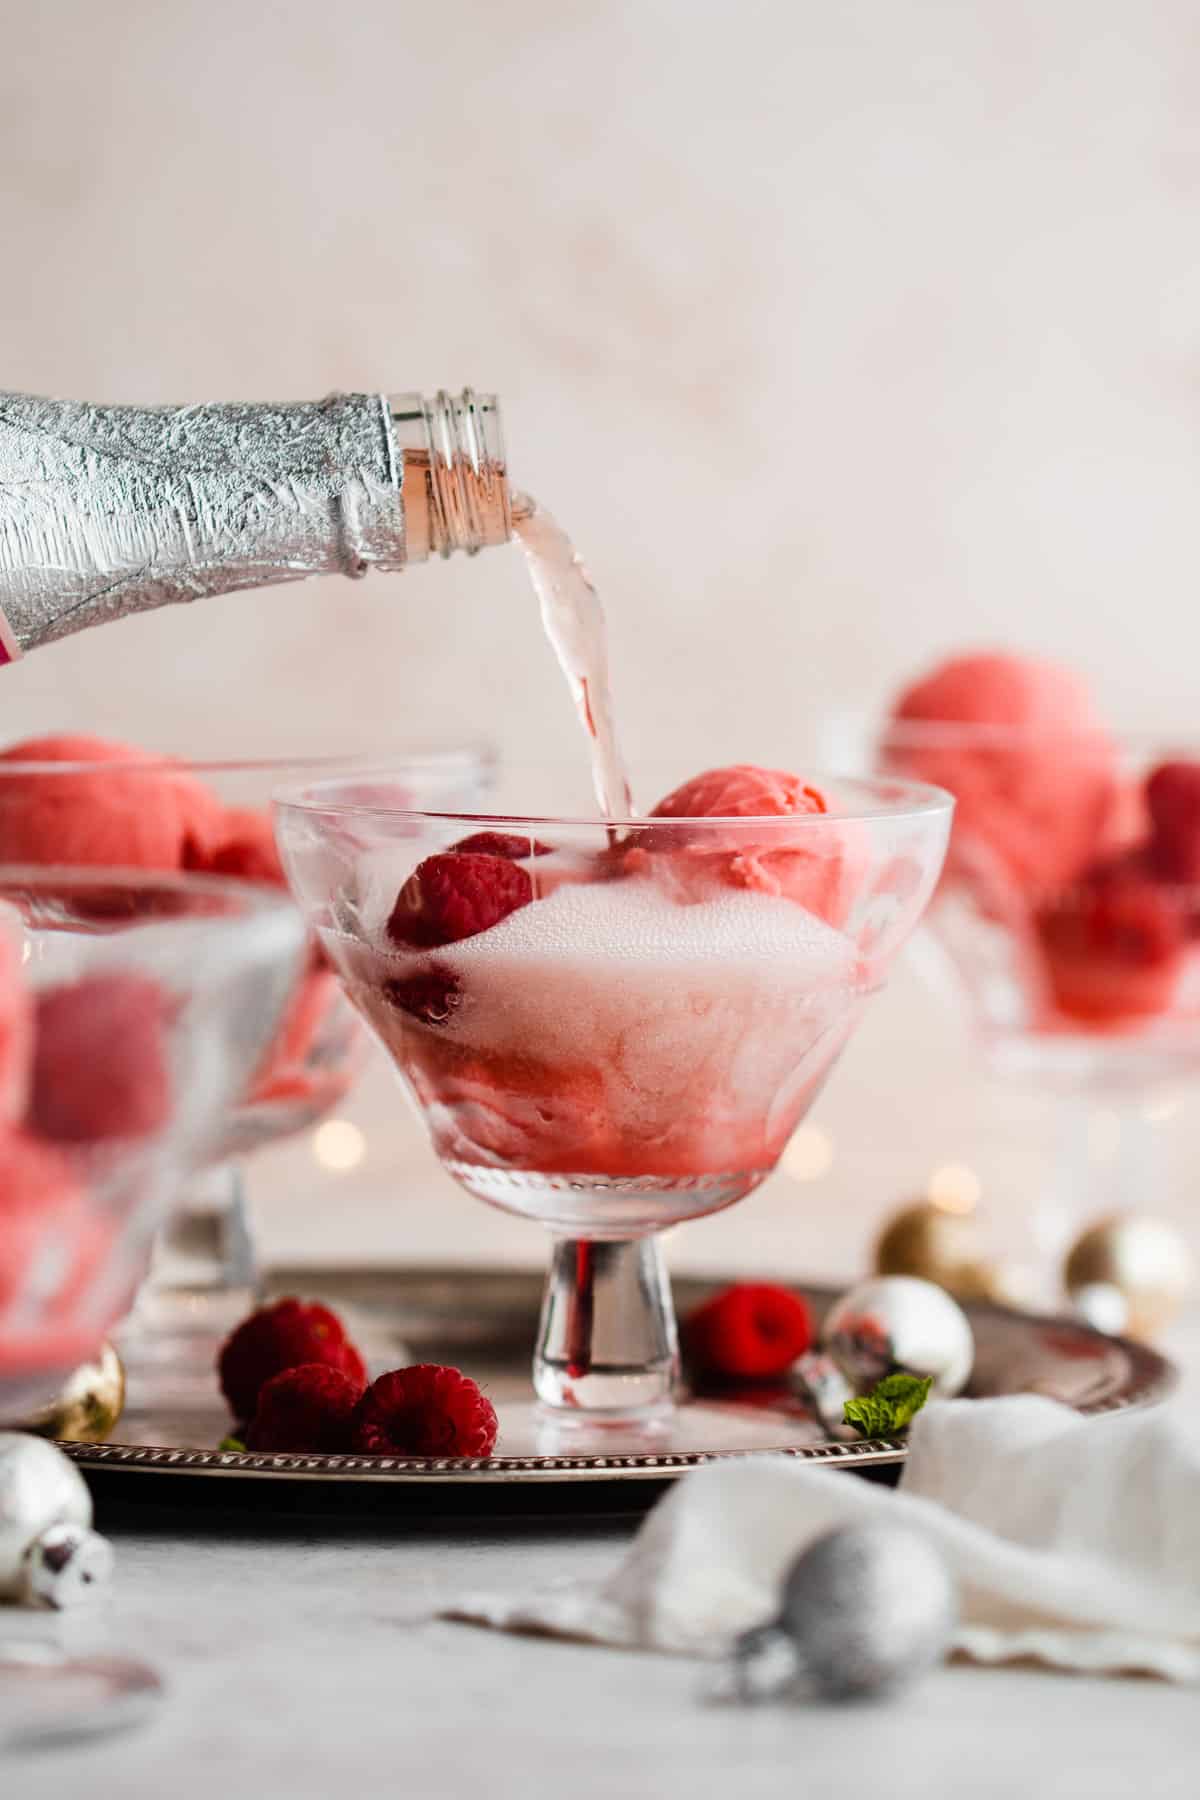 Sparkling champagne being poured over raspberry sorbet in a glass.